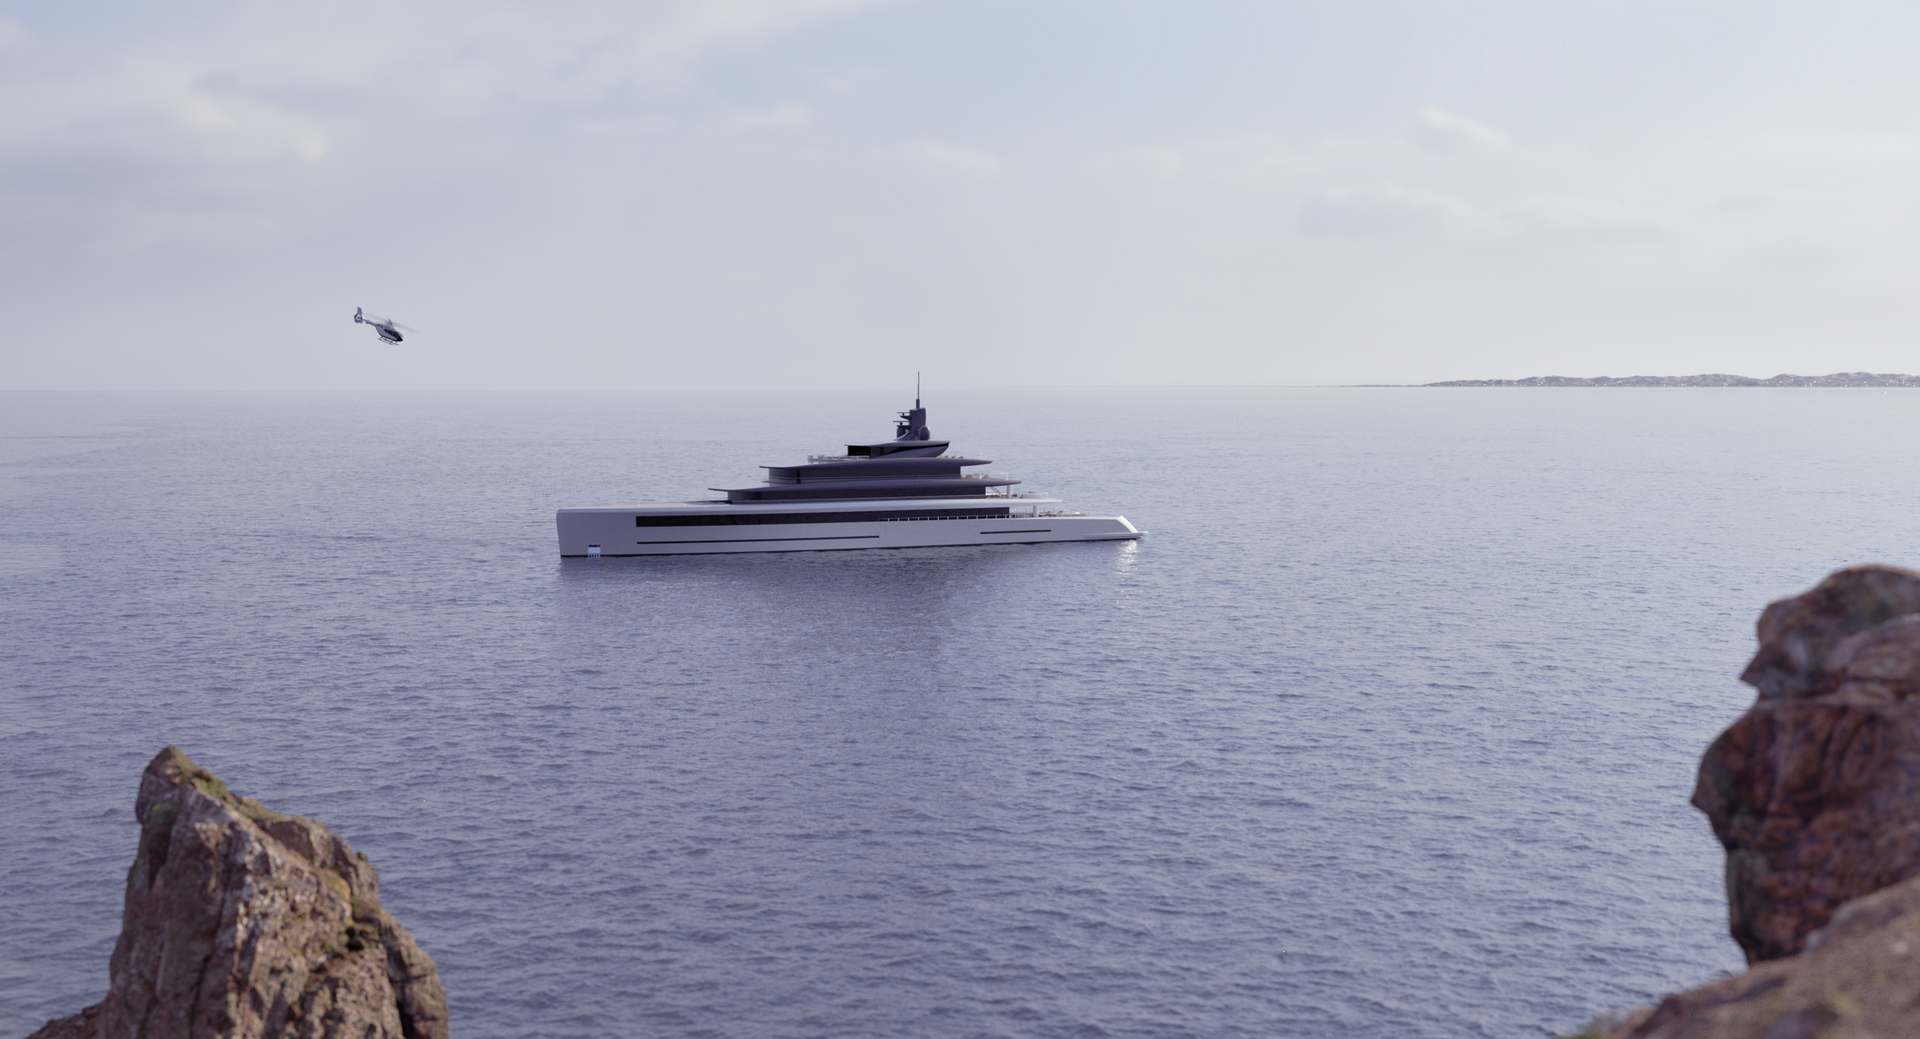 The render of a superyacht design